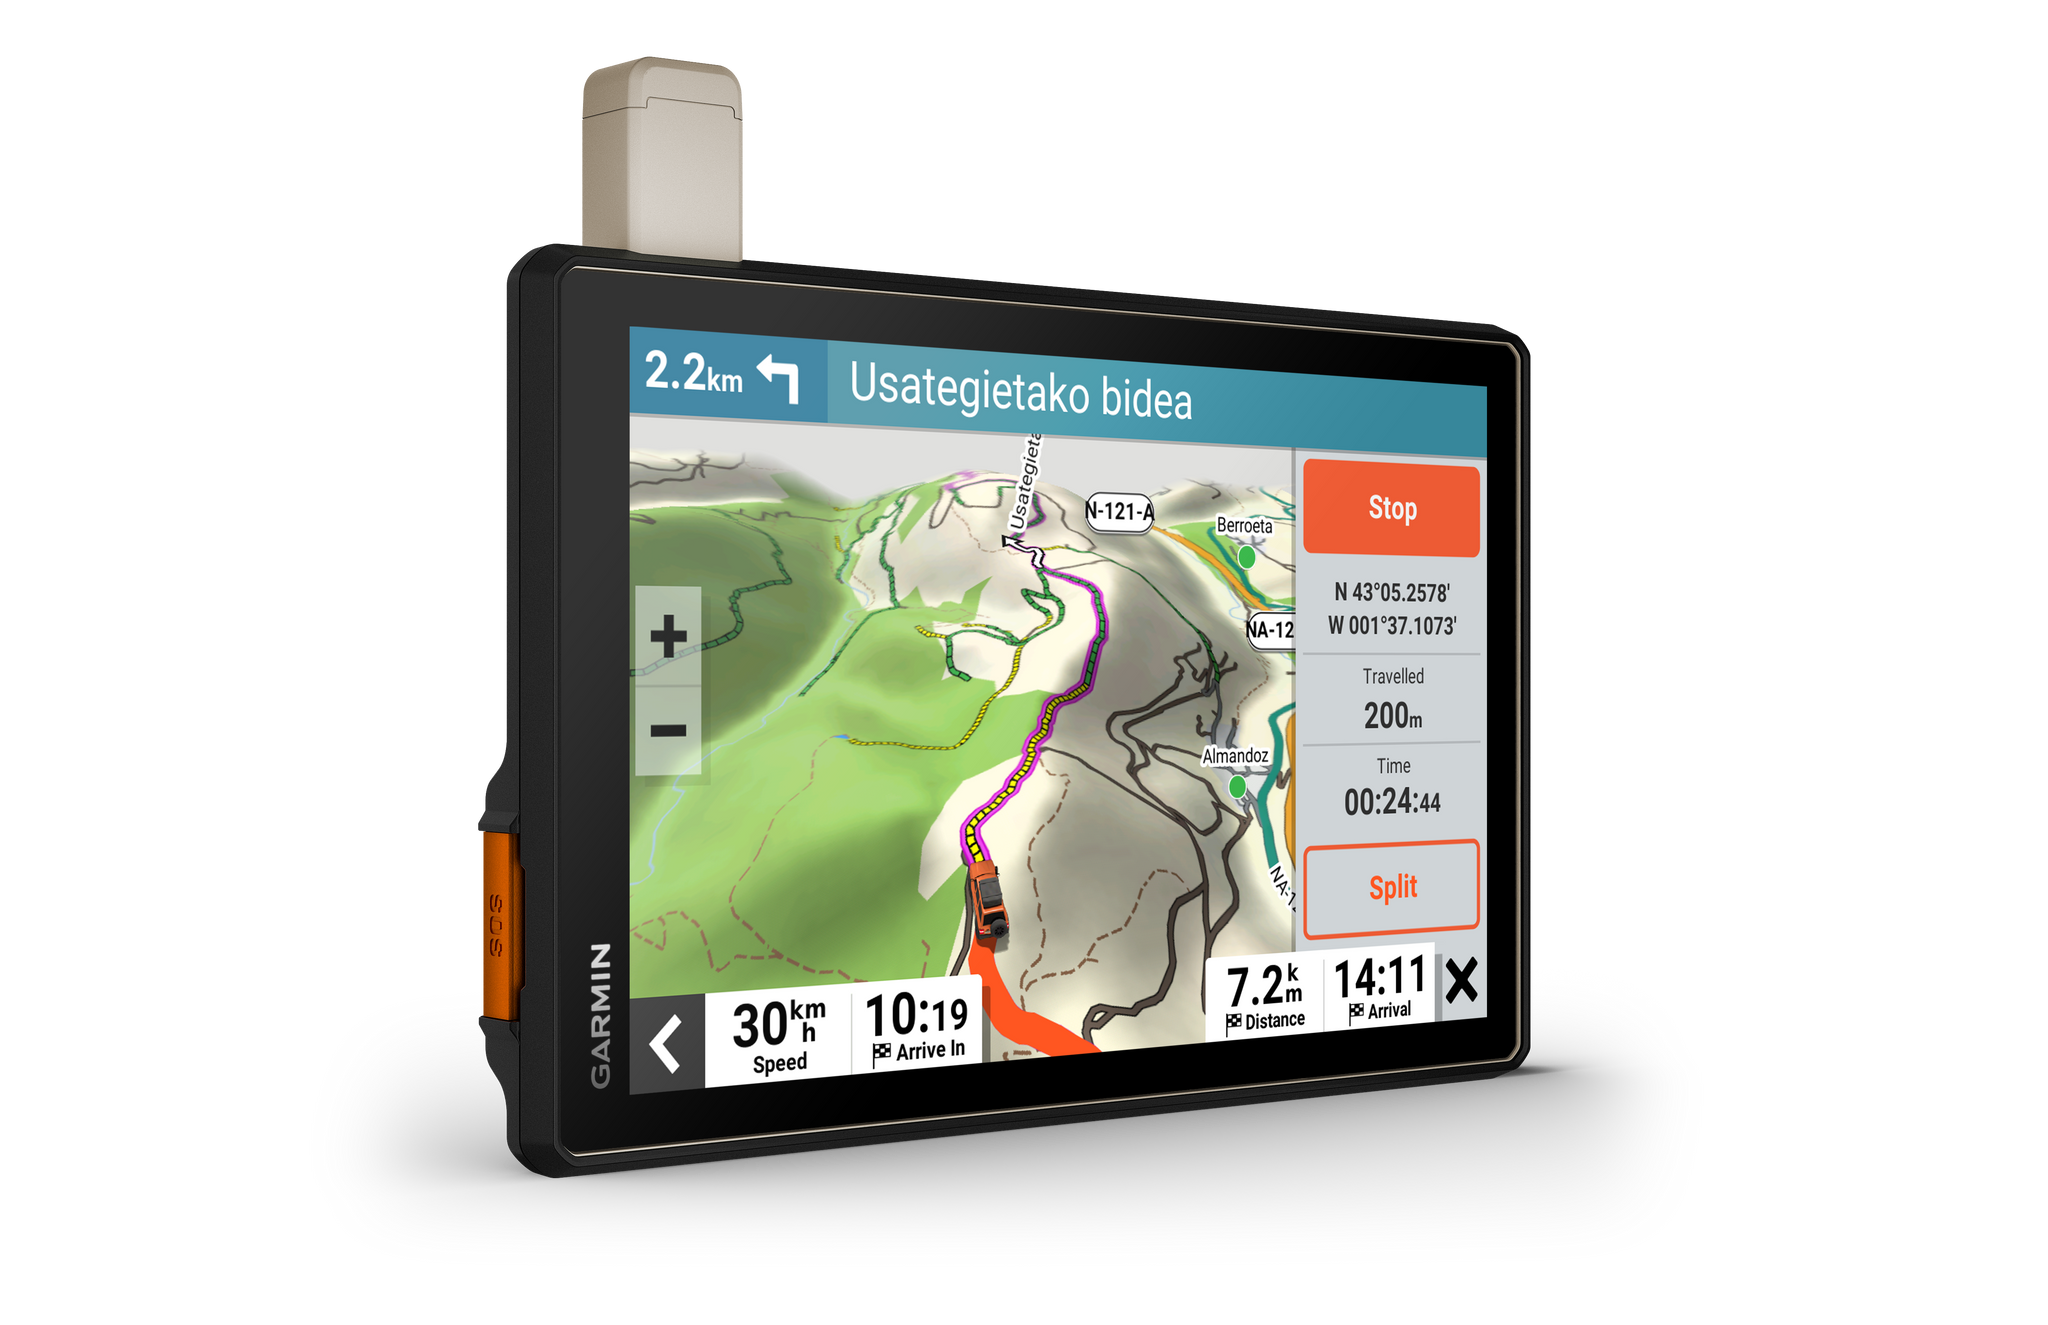 Garmin Edge 1030 Plus review – feature-packed GPS with XL screen